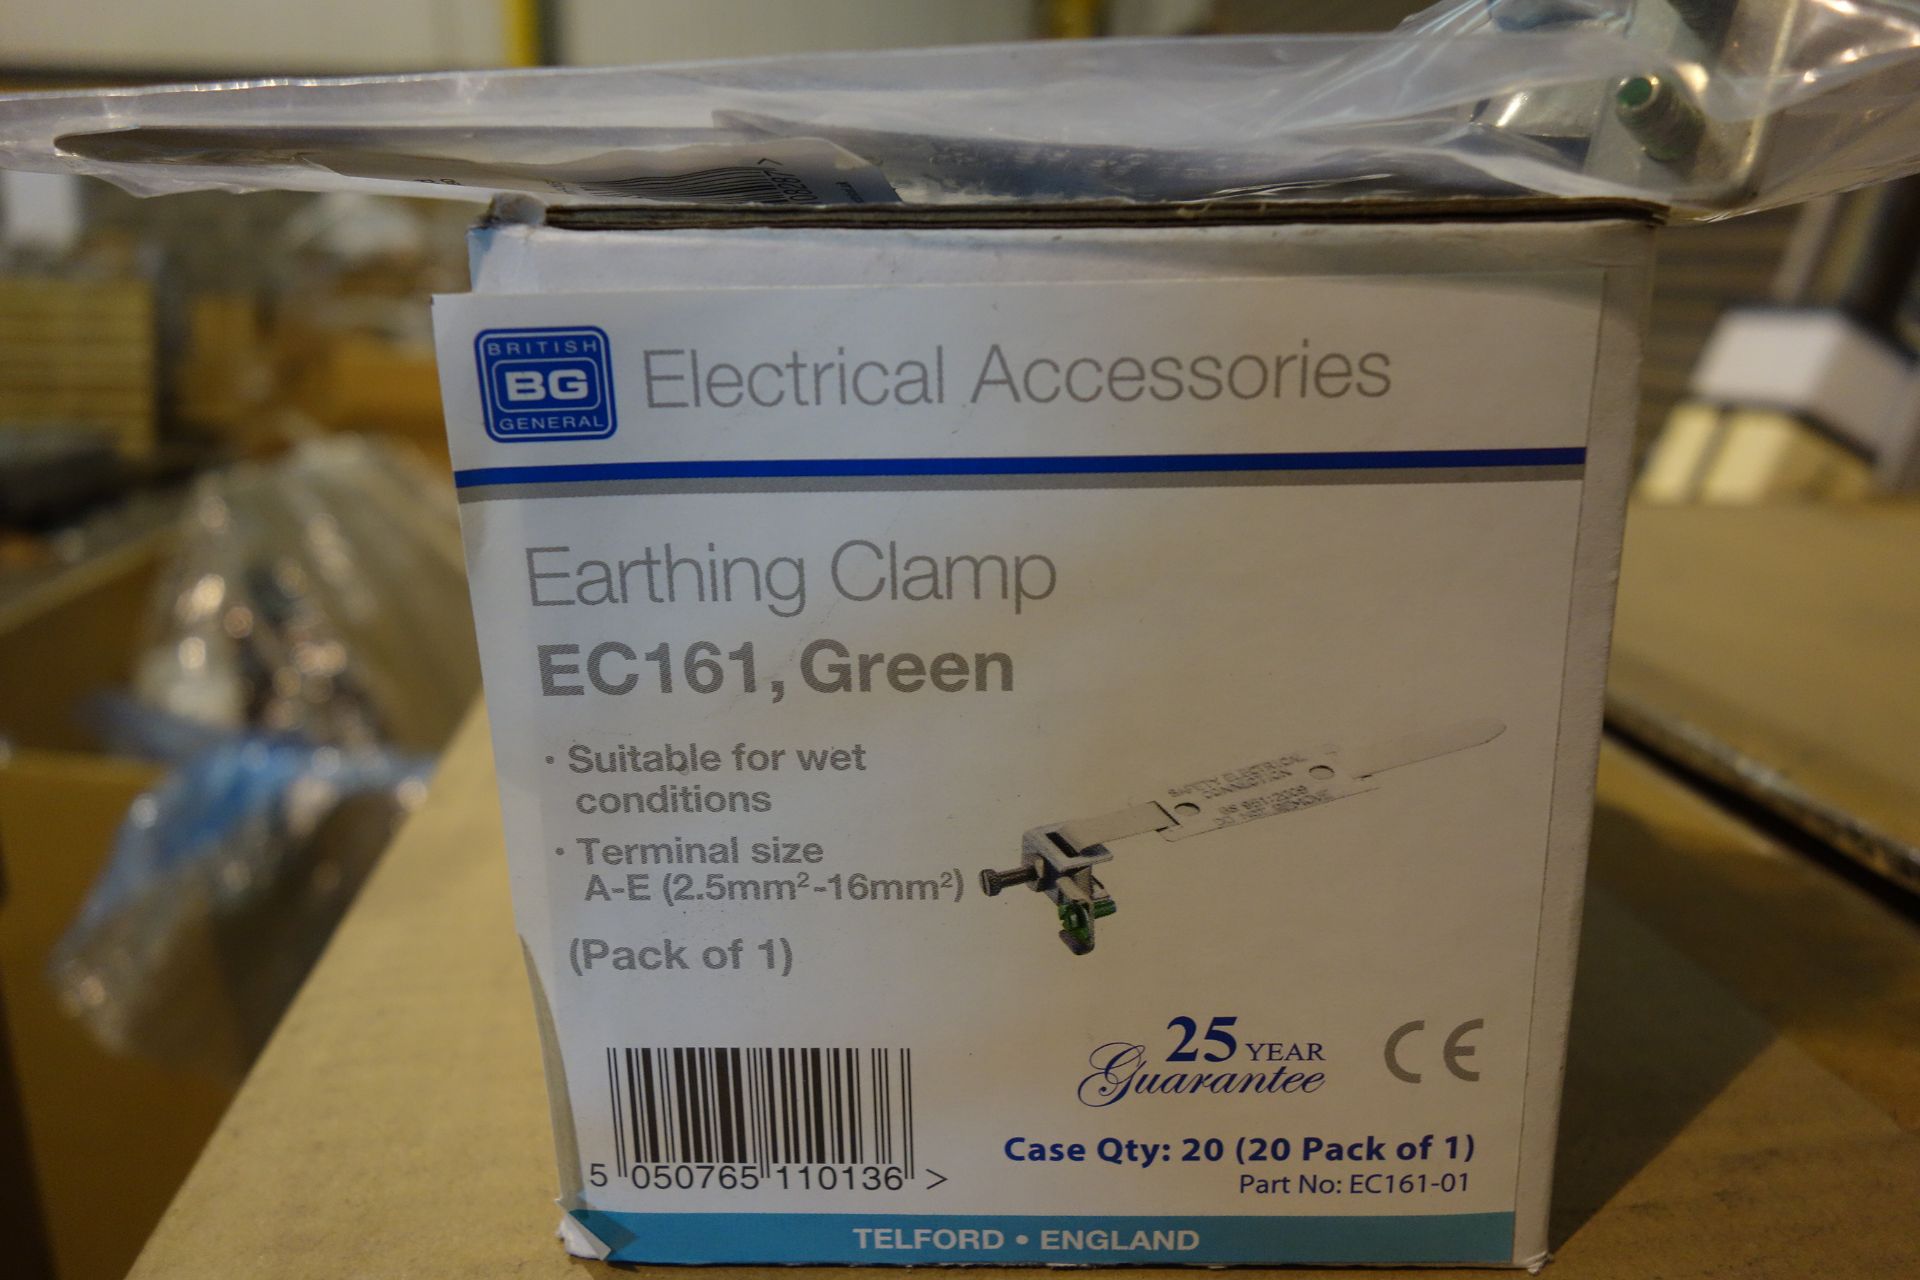 400 X British General Earthing Clamps EC161 Green Suitable For Wet Conditions For Terminal Size A-